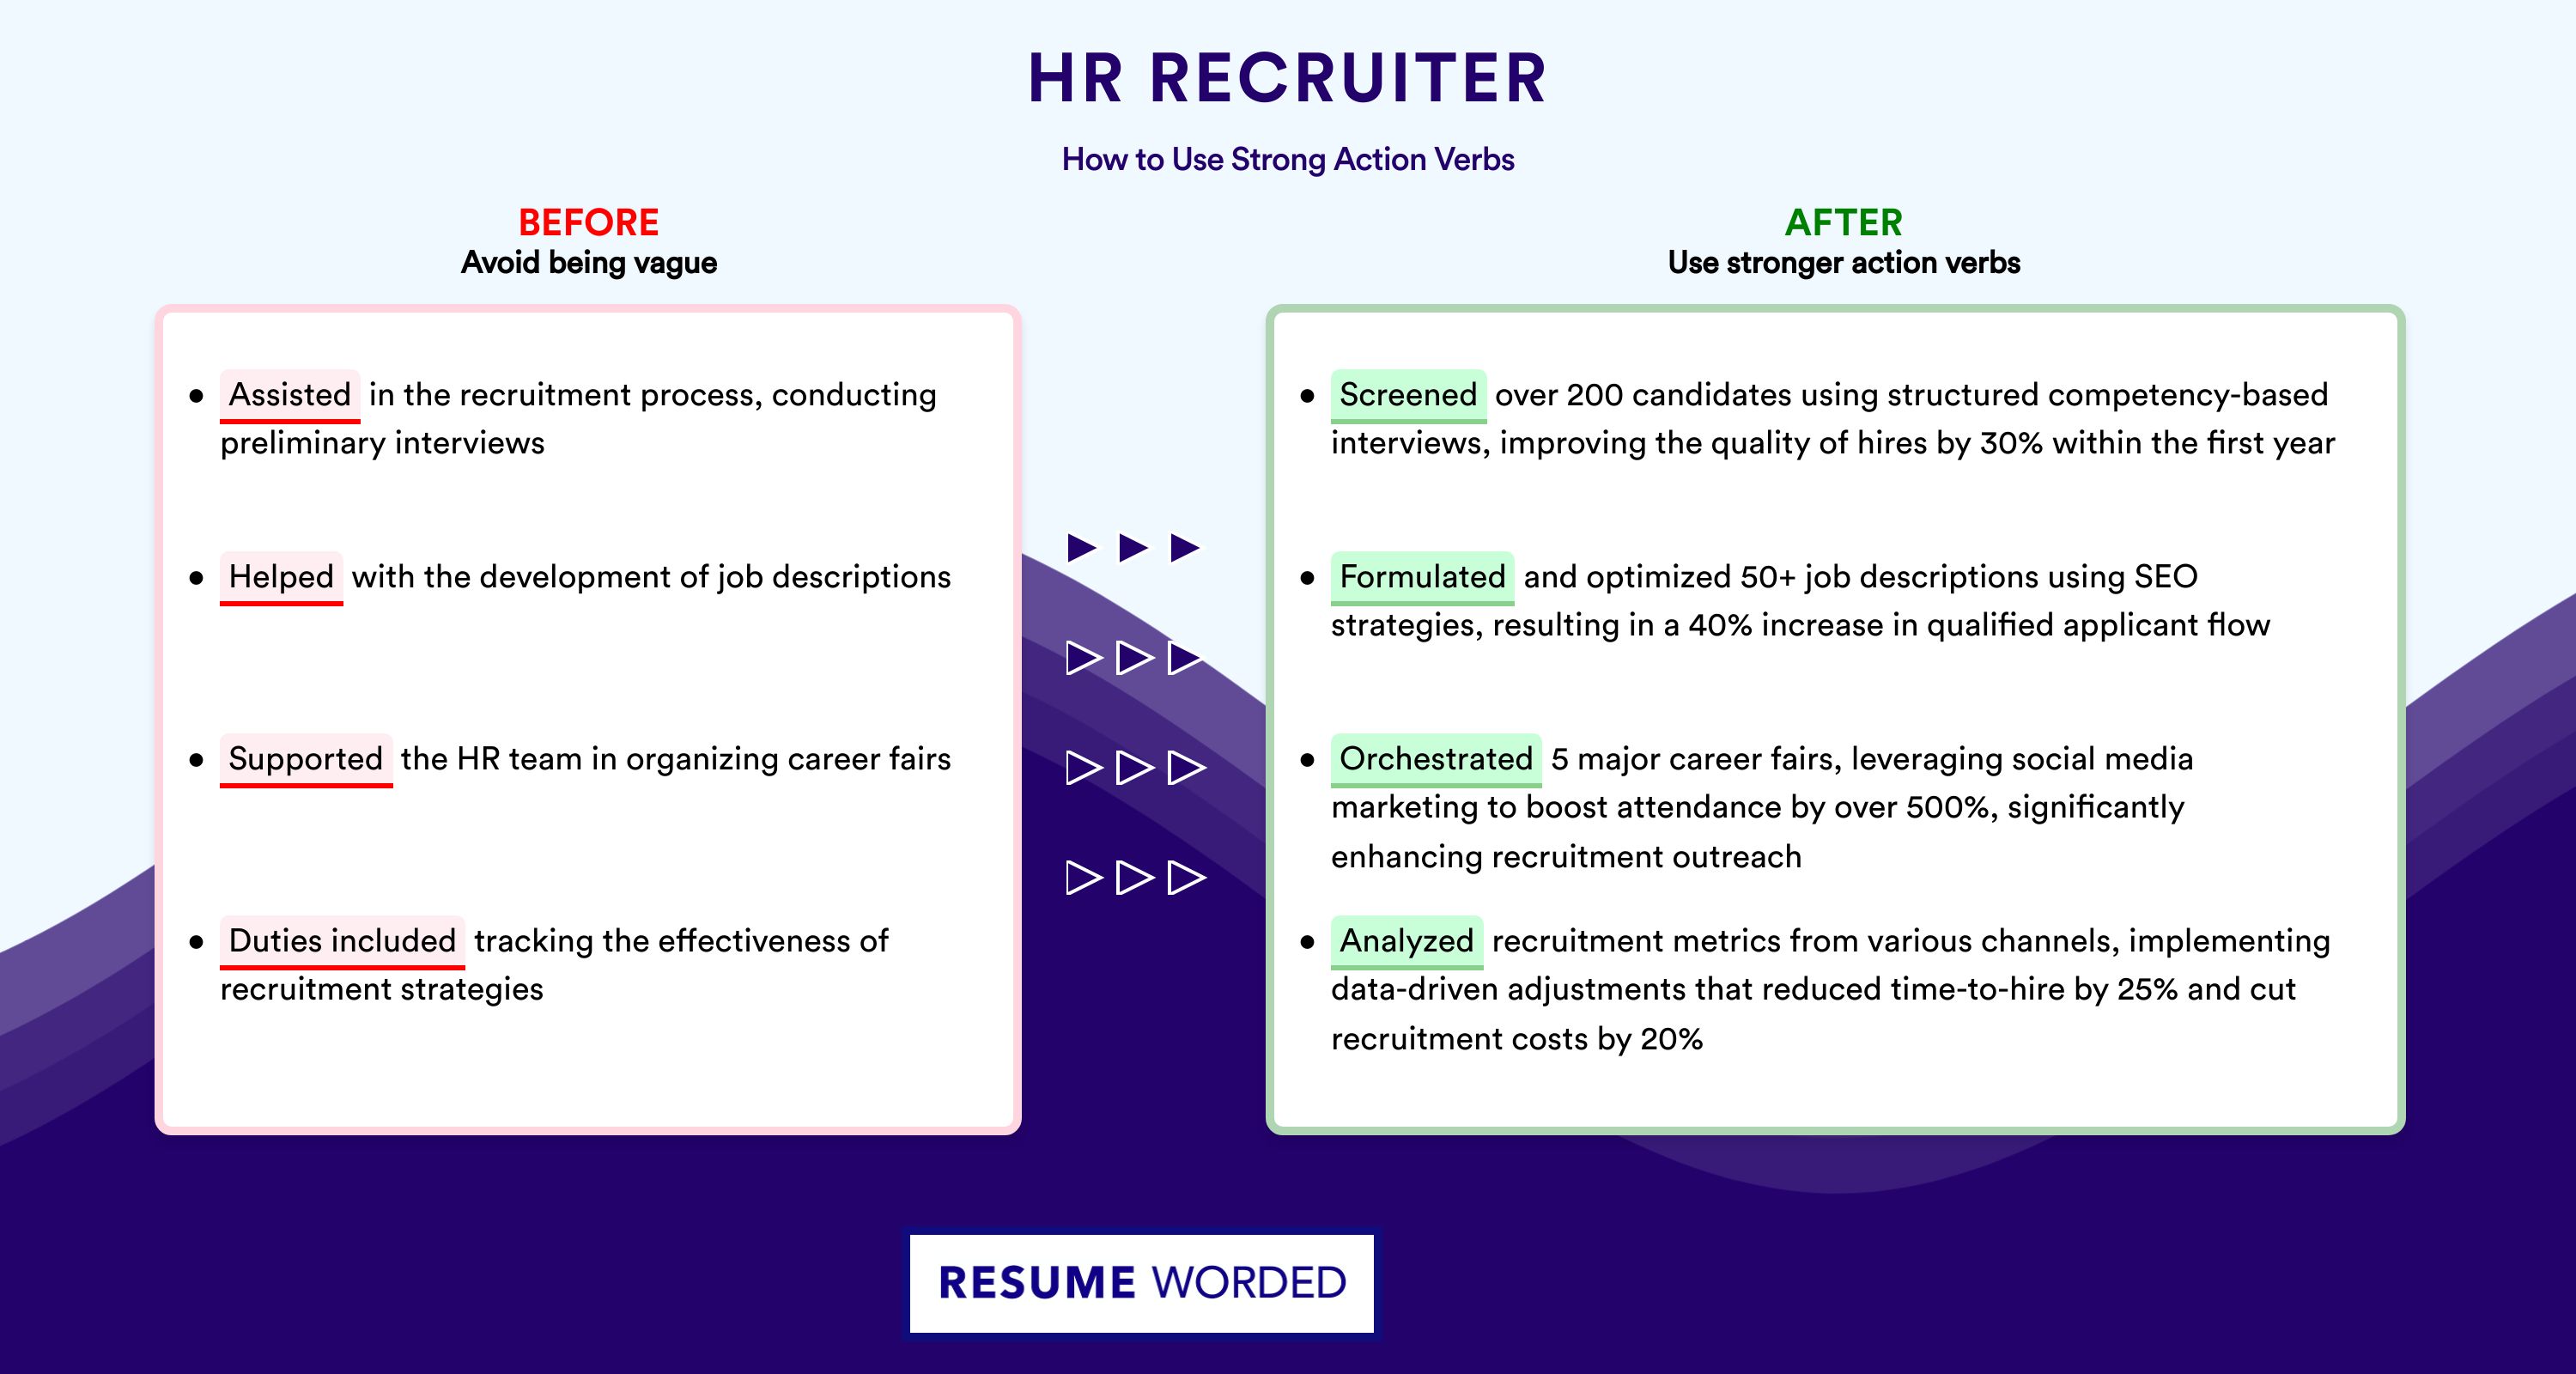 Action Verbs for HR Recruiter